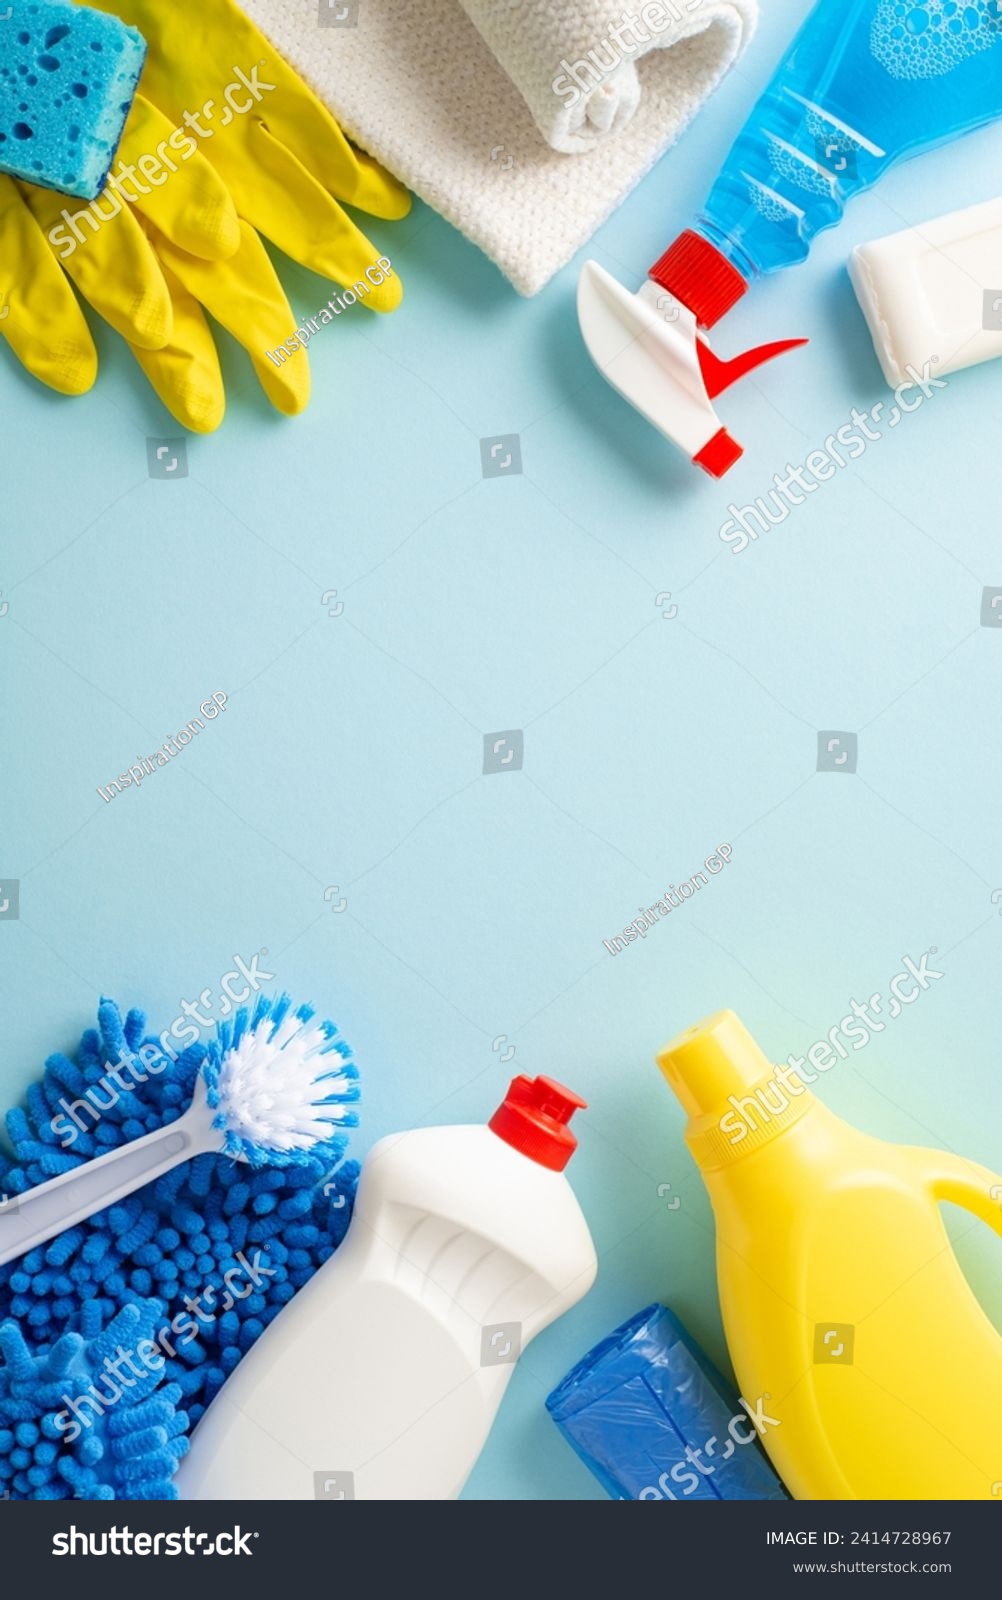 A clean sweep in aesthetics. Top view vertical photo featuring cleaning essentials—rags, gloves, and detergent bottles—arranged on calming pastel blue background. Adaptable space for text or branding #2414728967